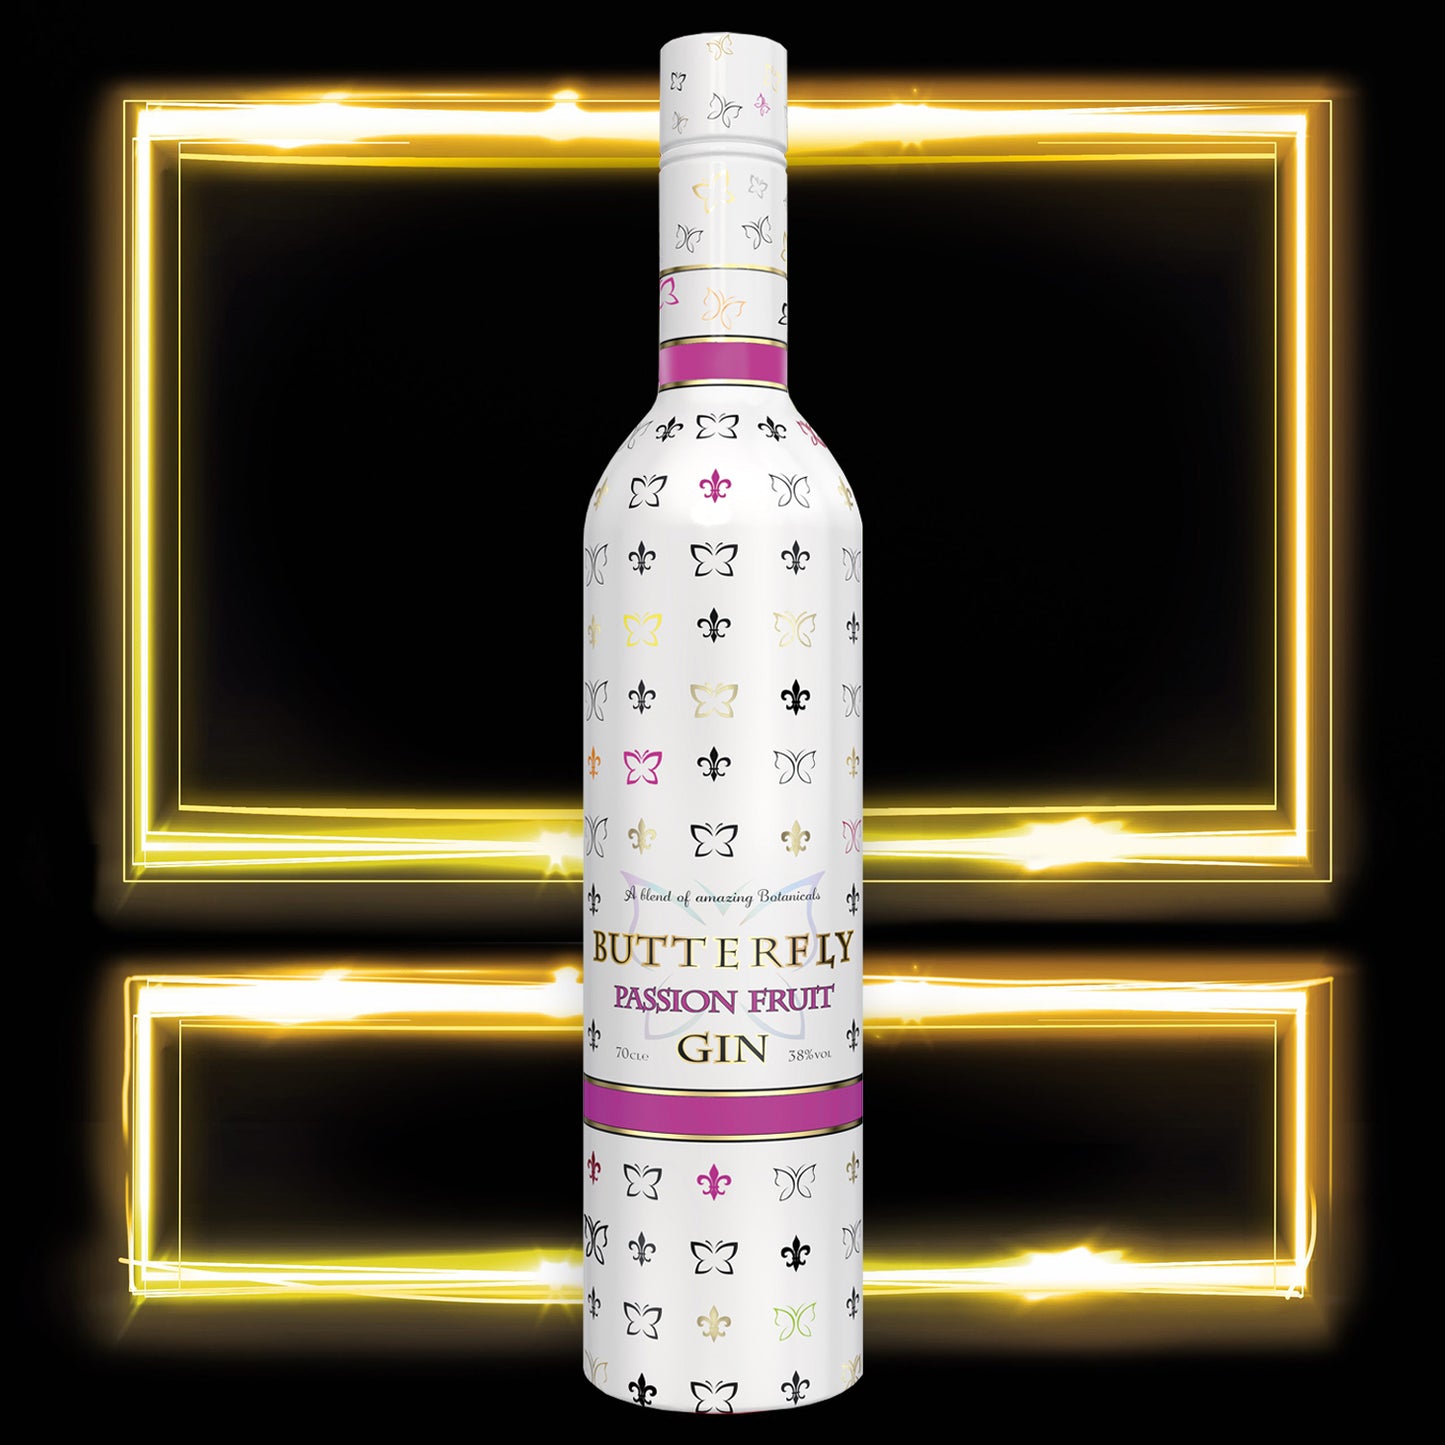 Butterfly Gin Passion Fruit